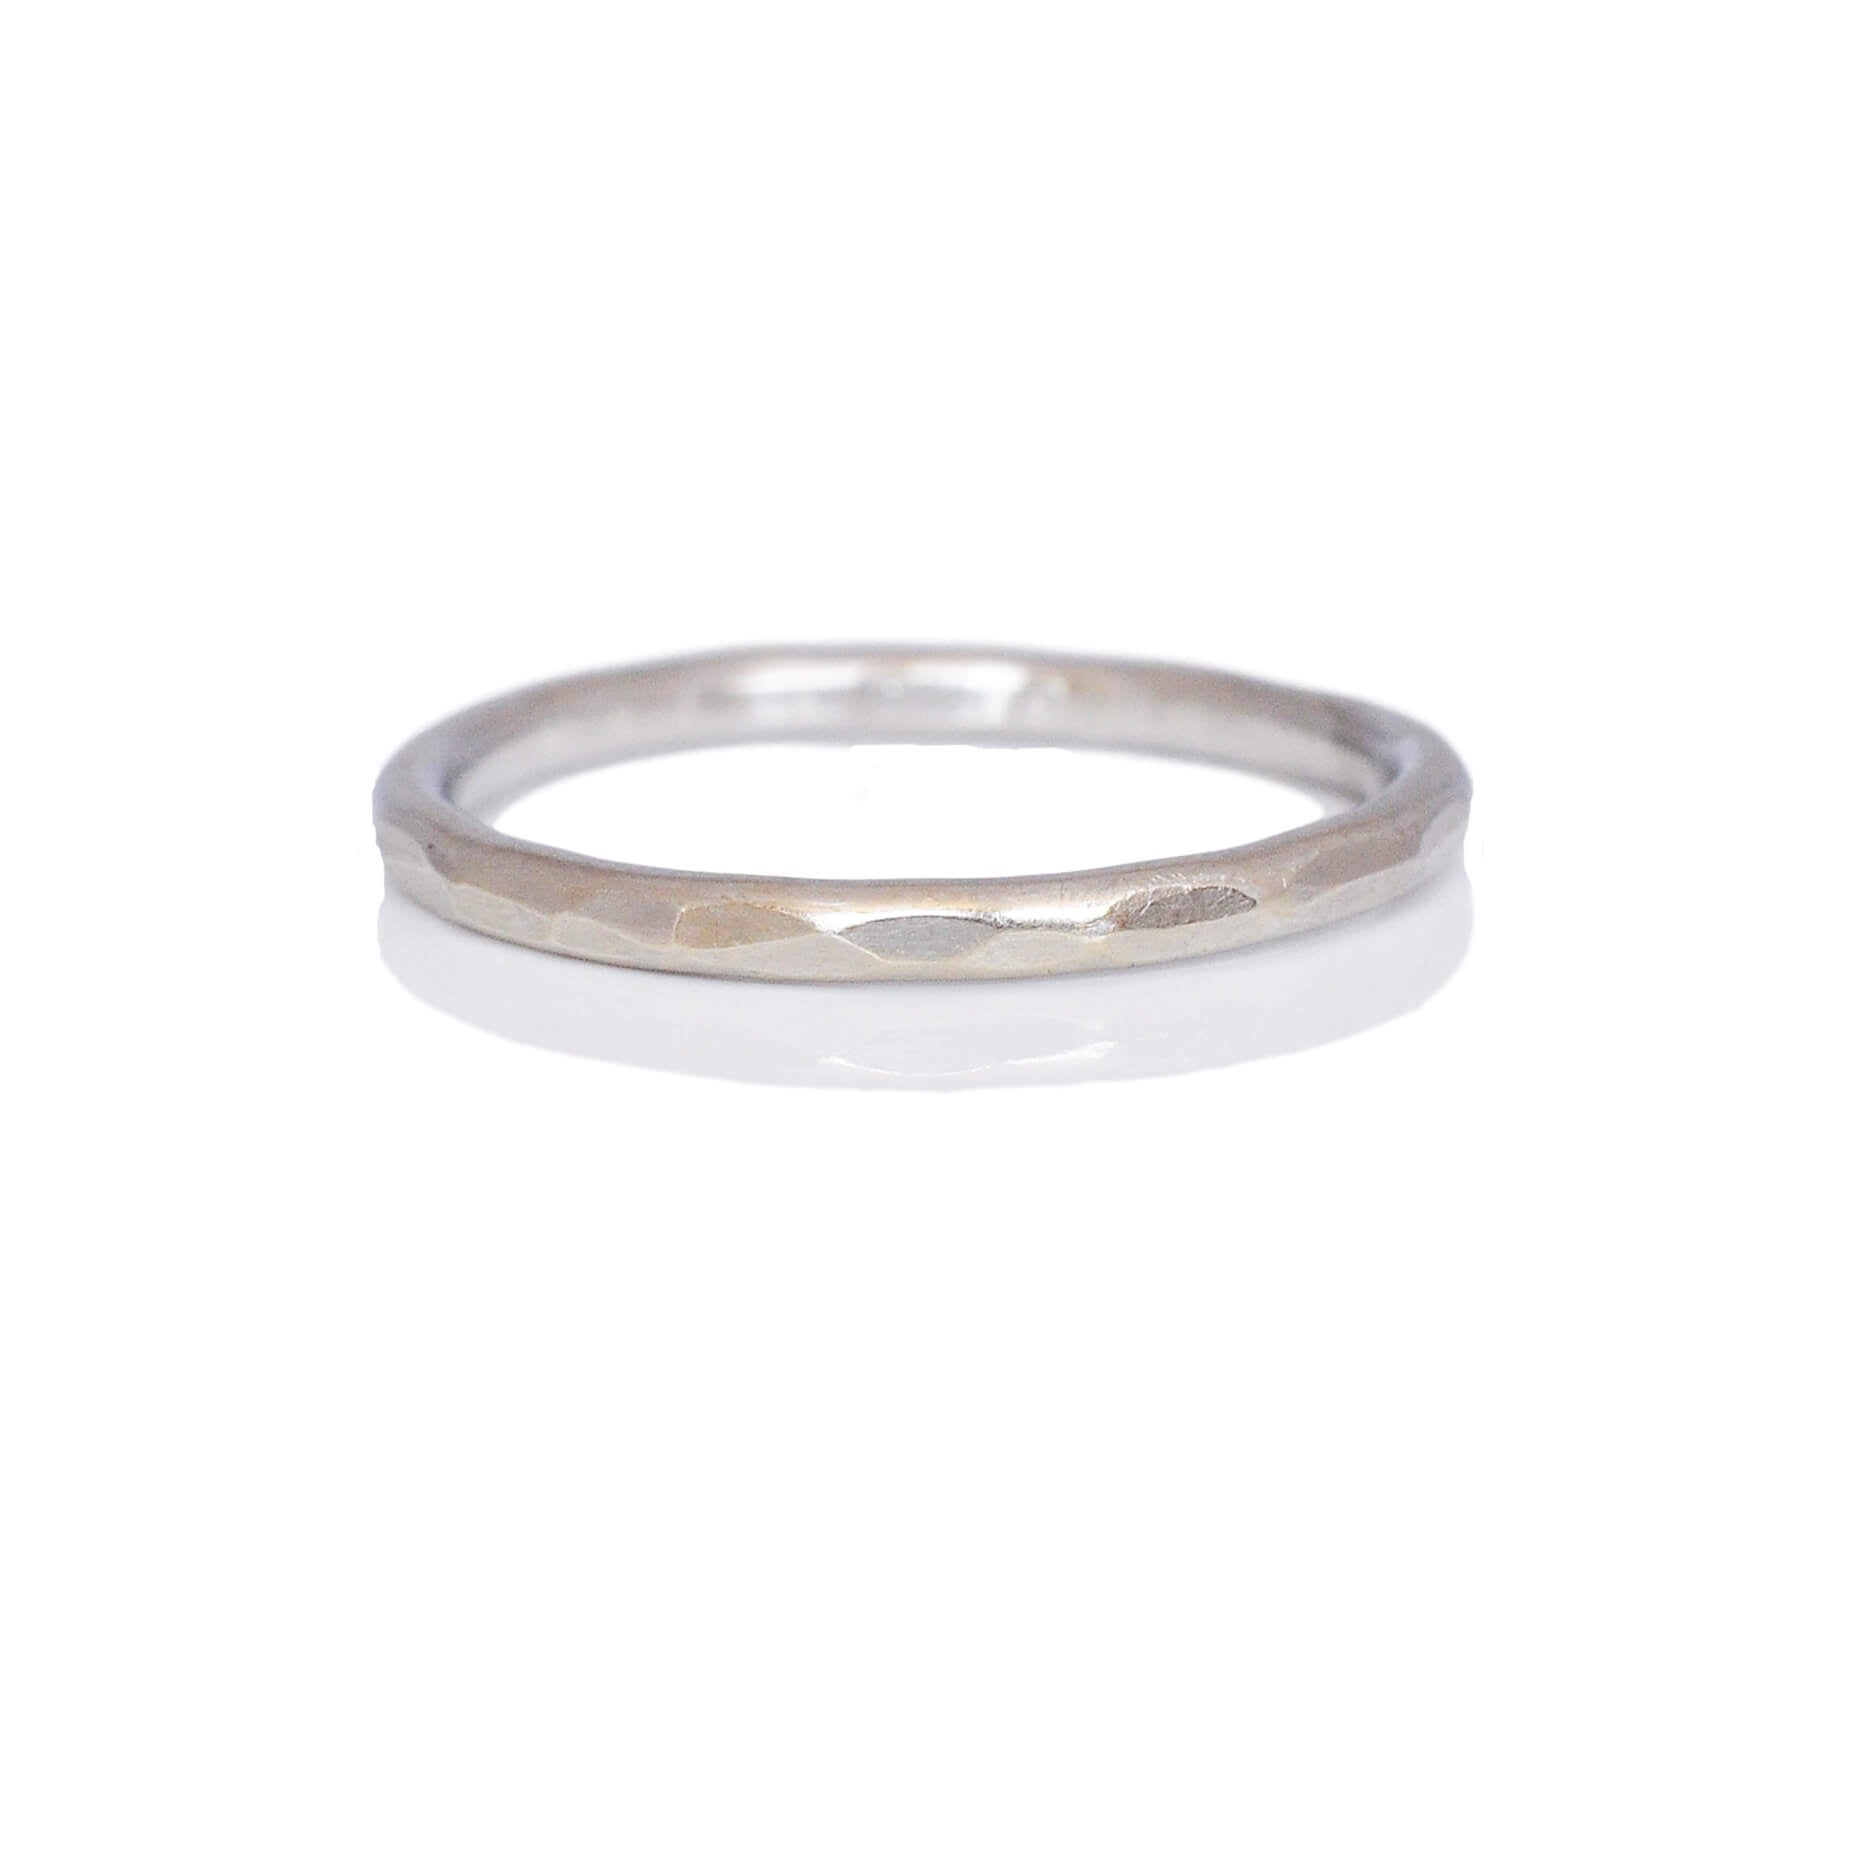 Simple and modern round hammered wedding band in 950 platinum. Handmade with recycled metal  by EC Design Studio in Minneapolis, MN.